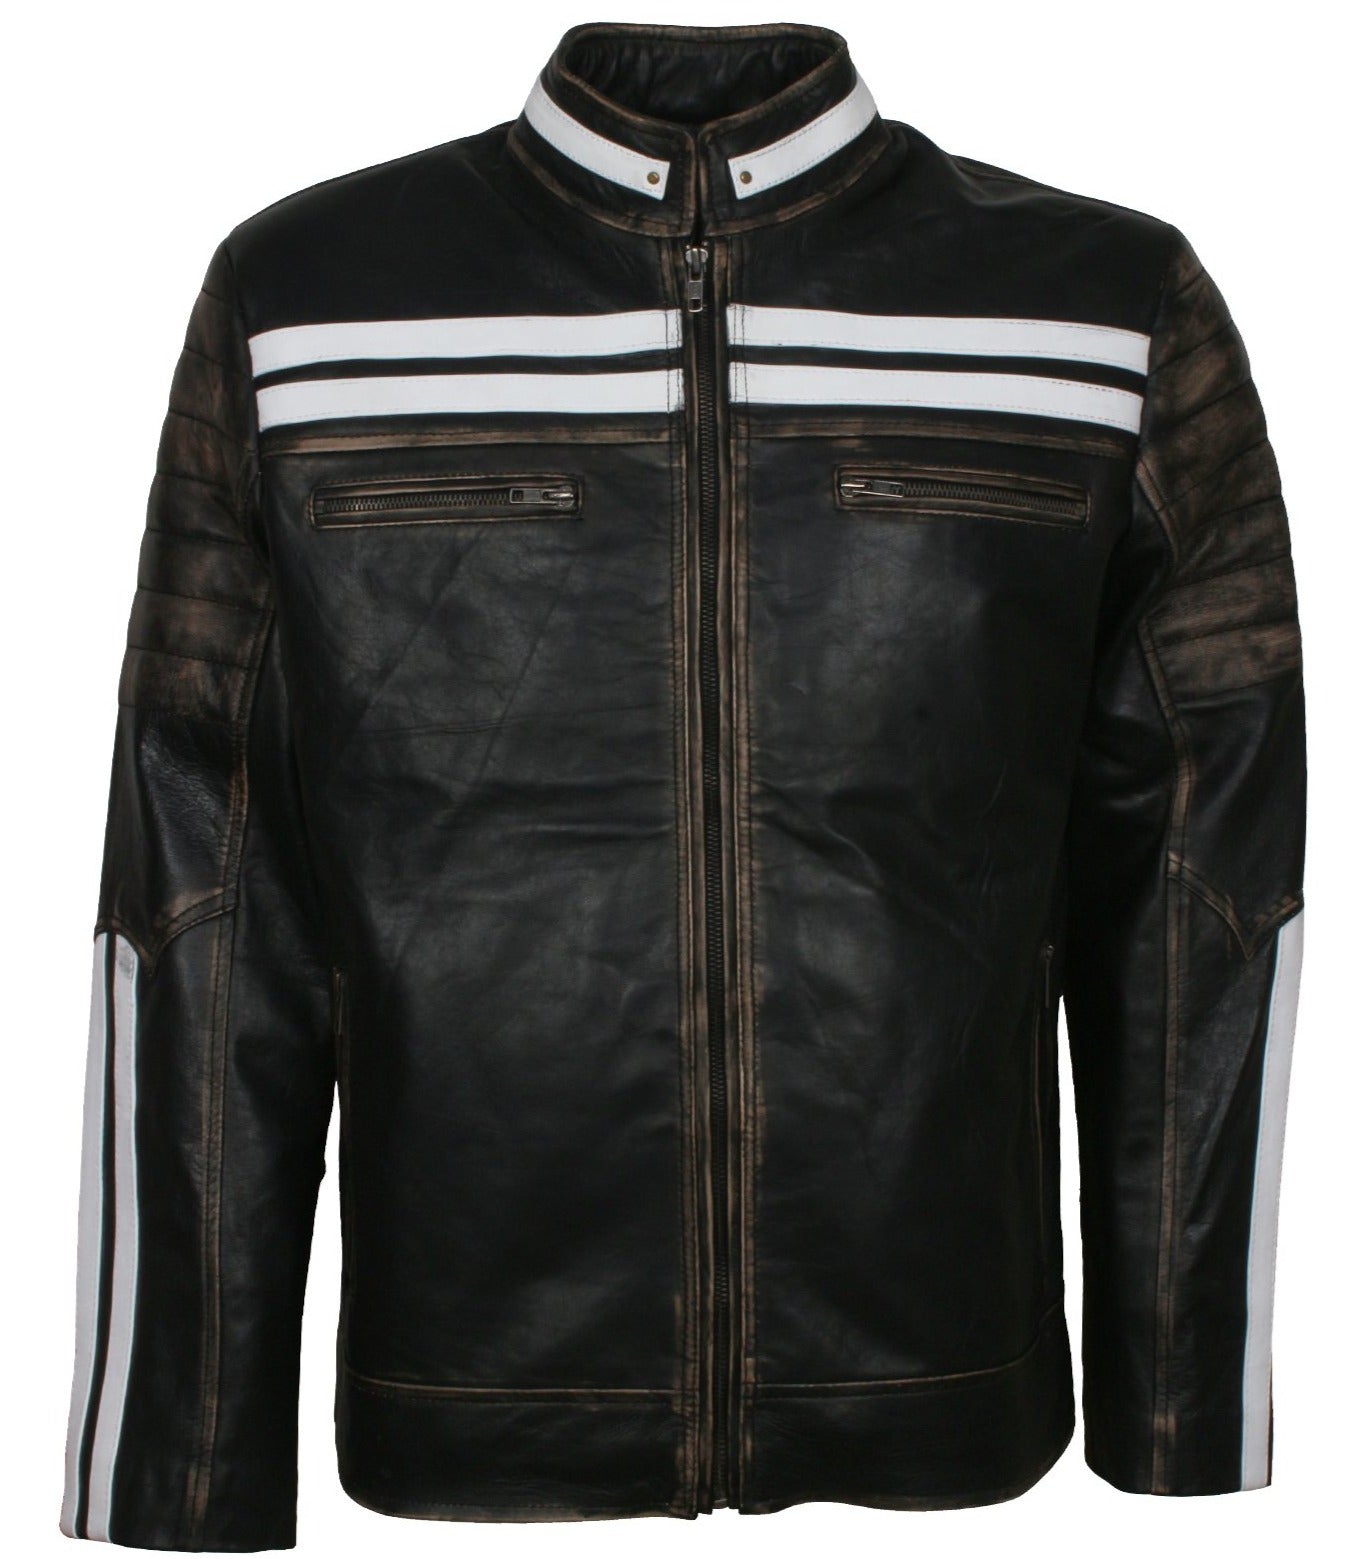 Distressed Leather Jacket With White Stripes